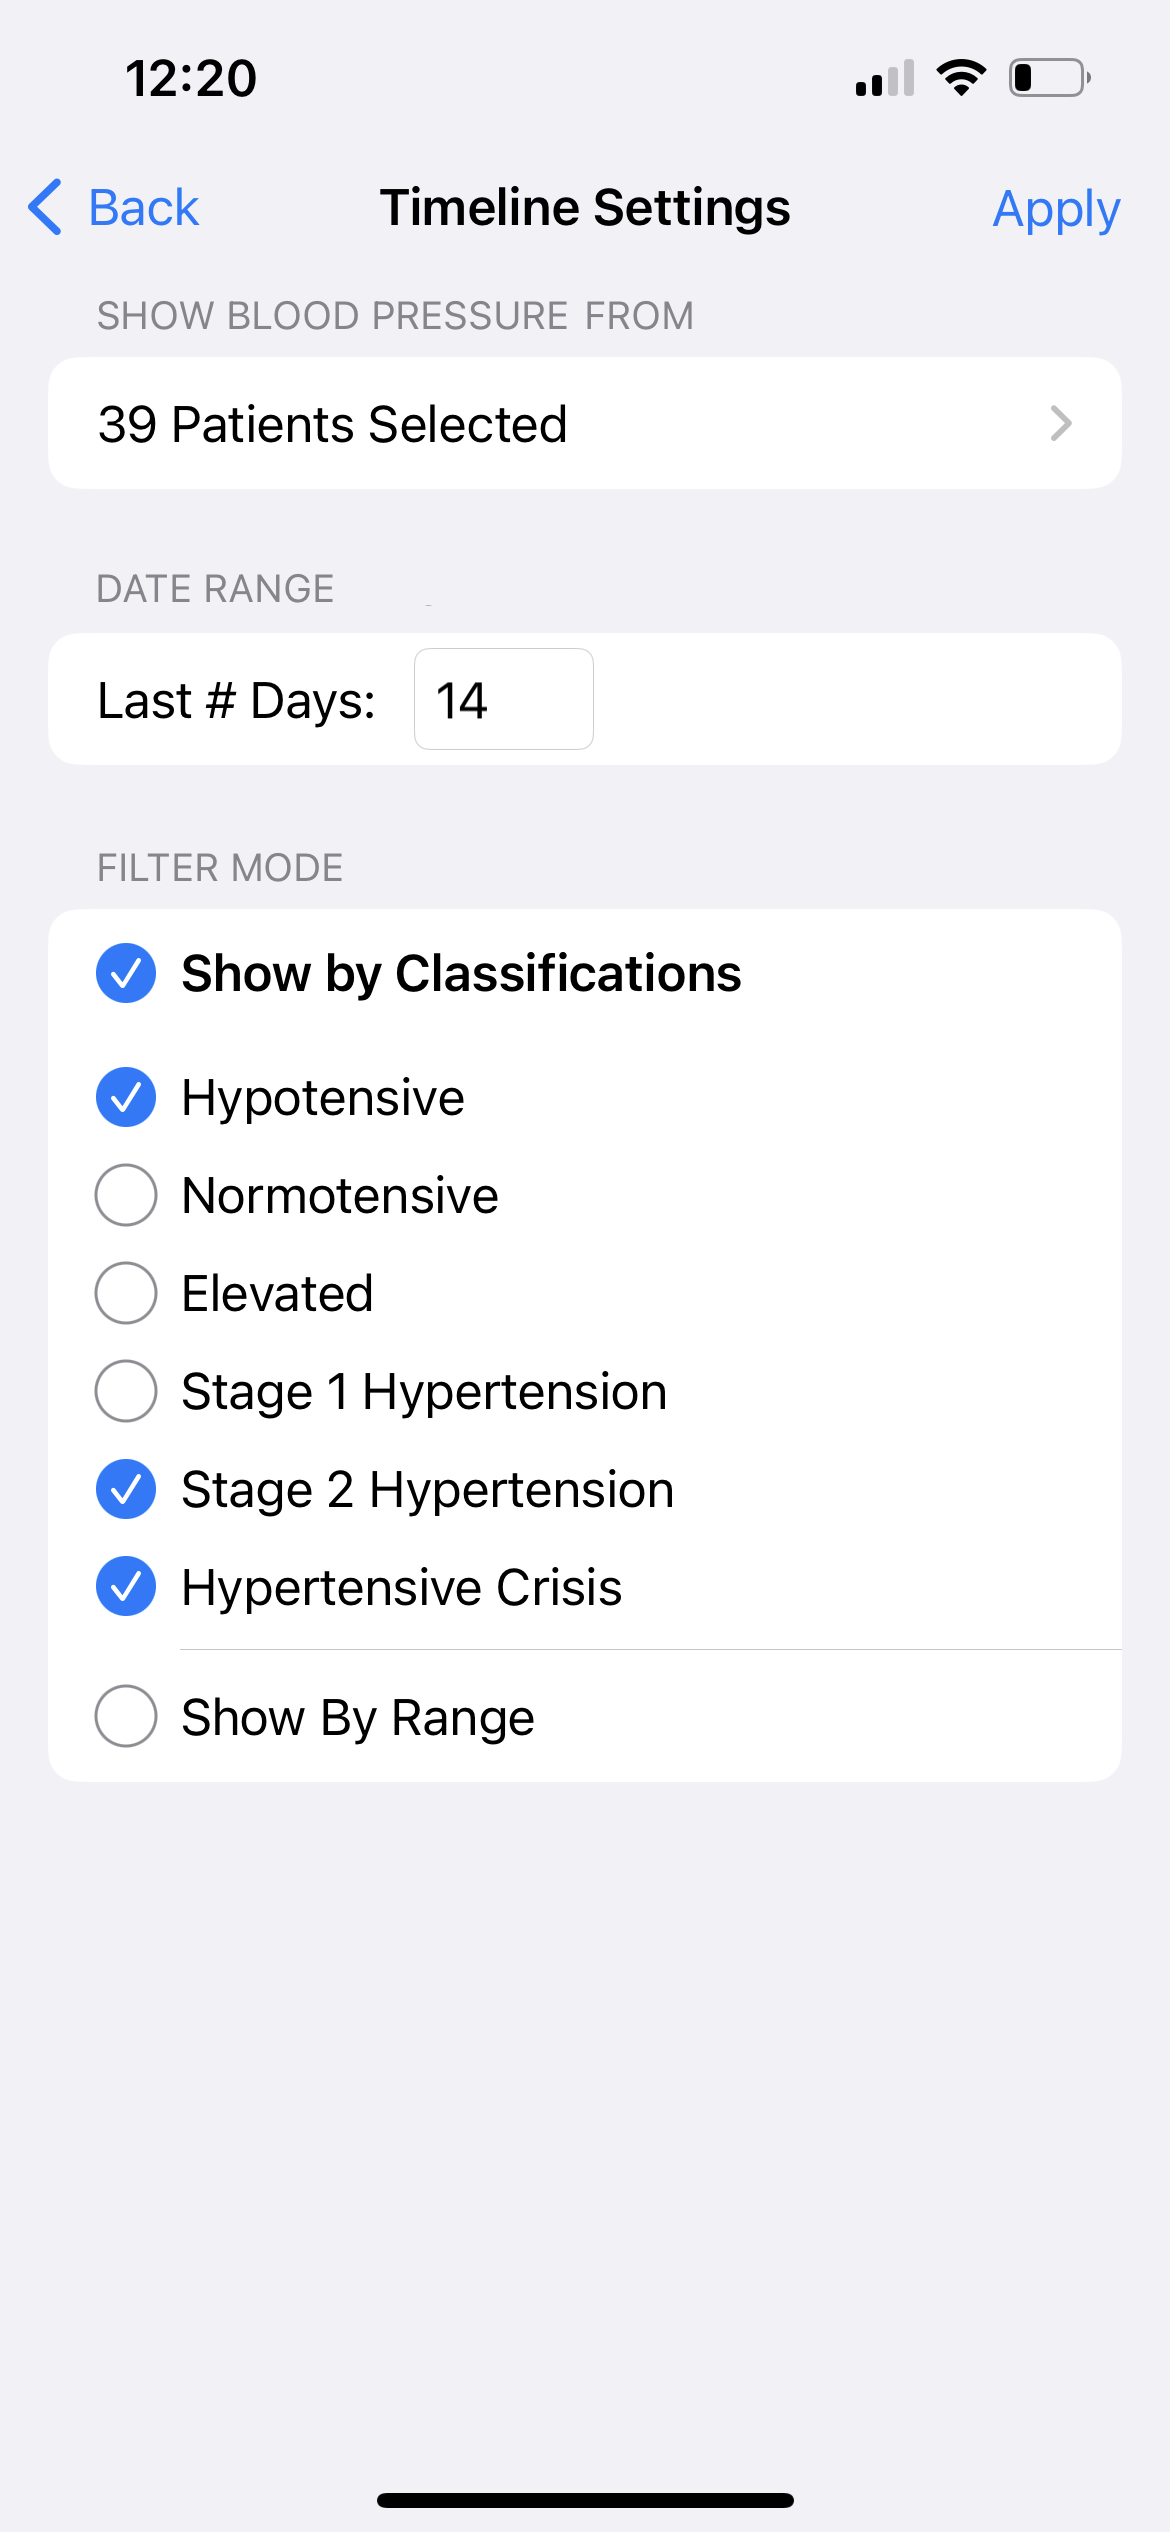 407x867 screenshot of blood pressure filtering options (hypotensive, normotensive, stage 1 hypertension, stage 2 hypertension, and hyptertensive crisis, applicable to selected patient(s) and within the last N number of days